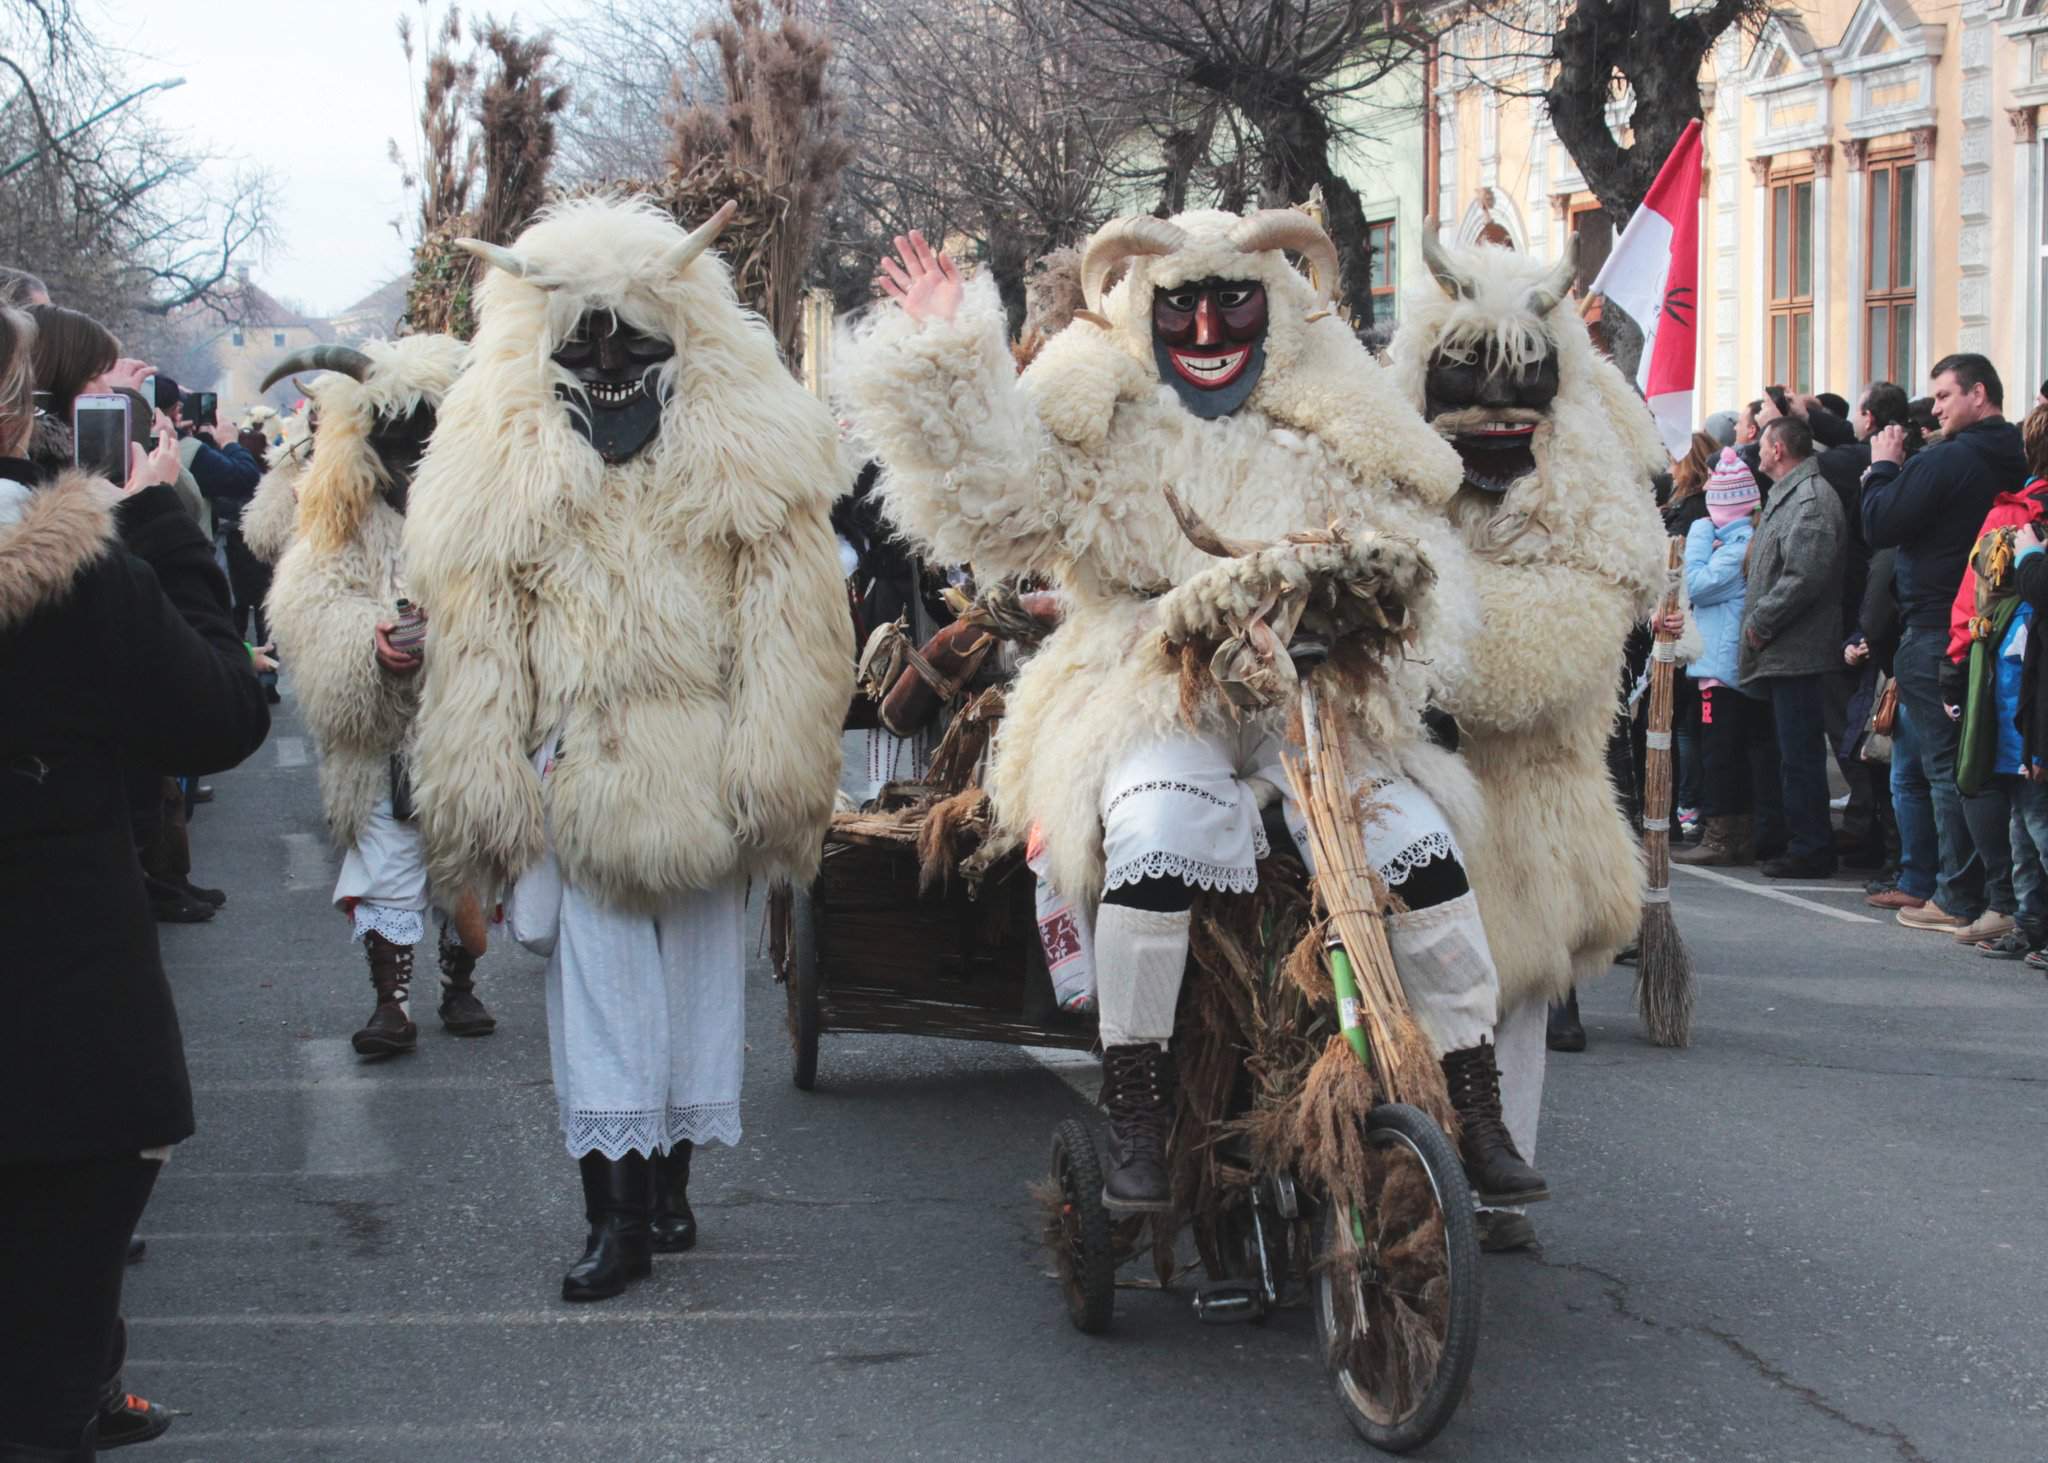 Hungarian traditions: the beginning of the Carnival season and spring